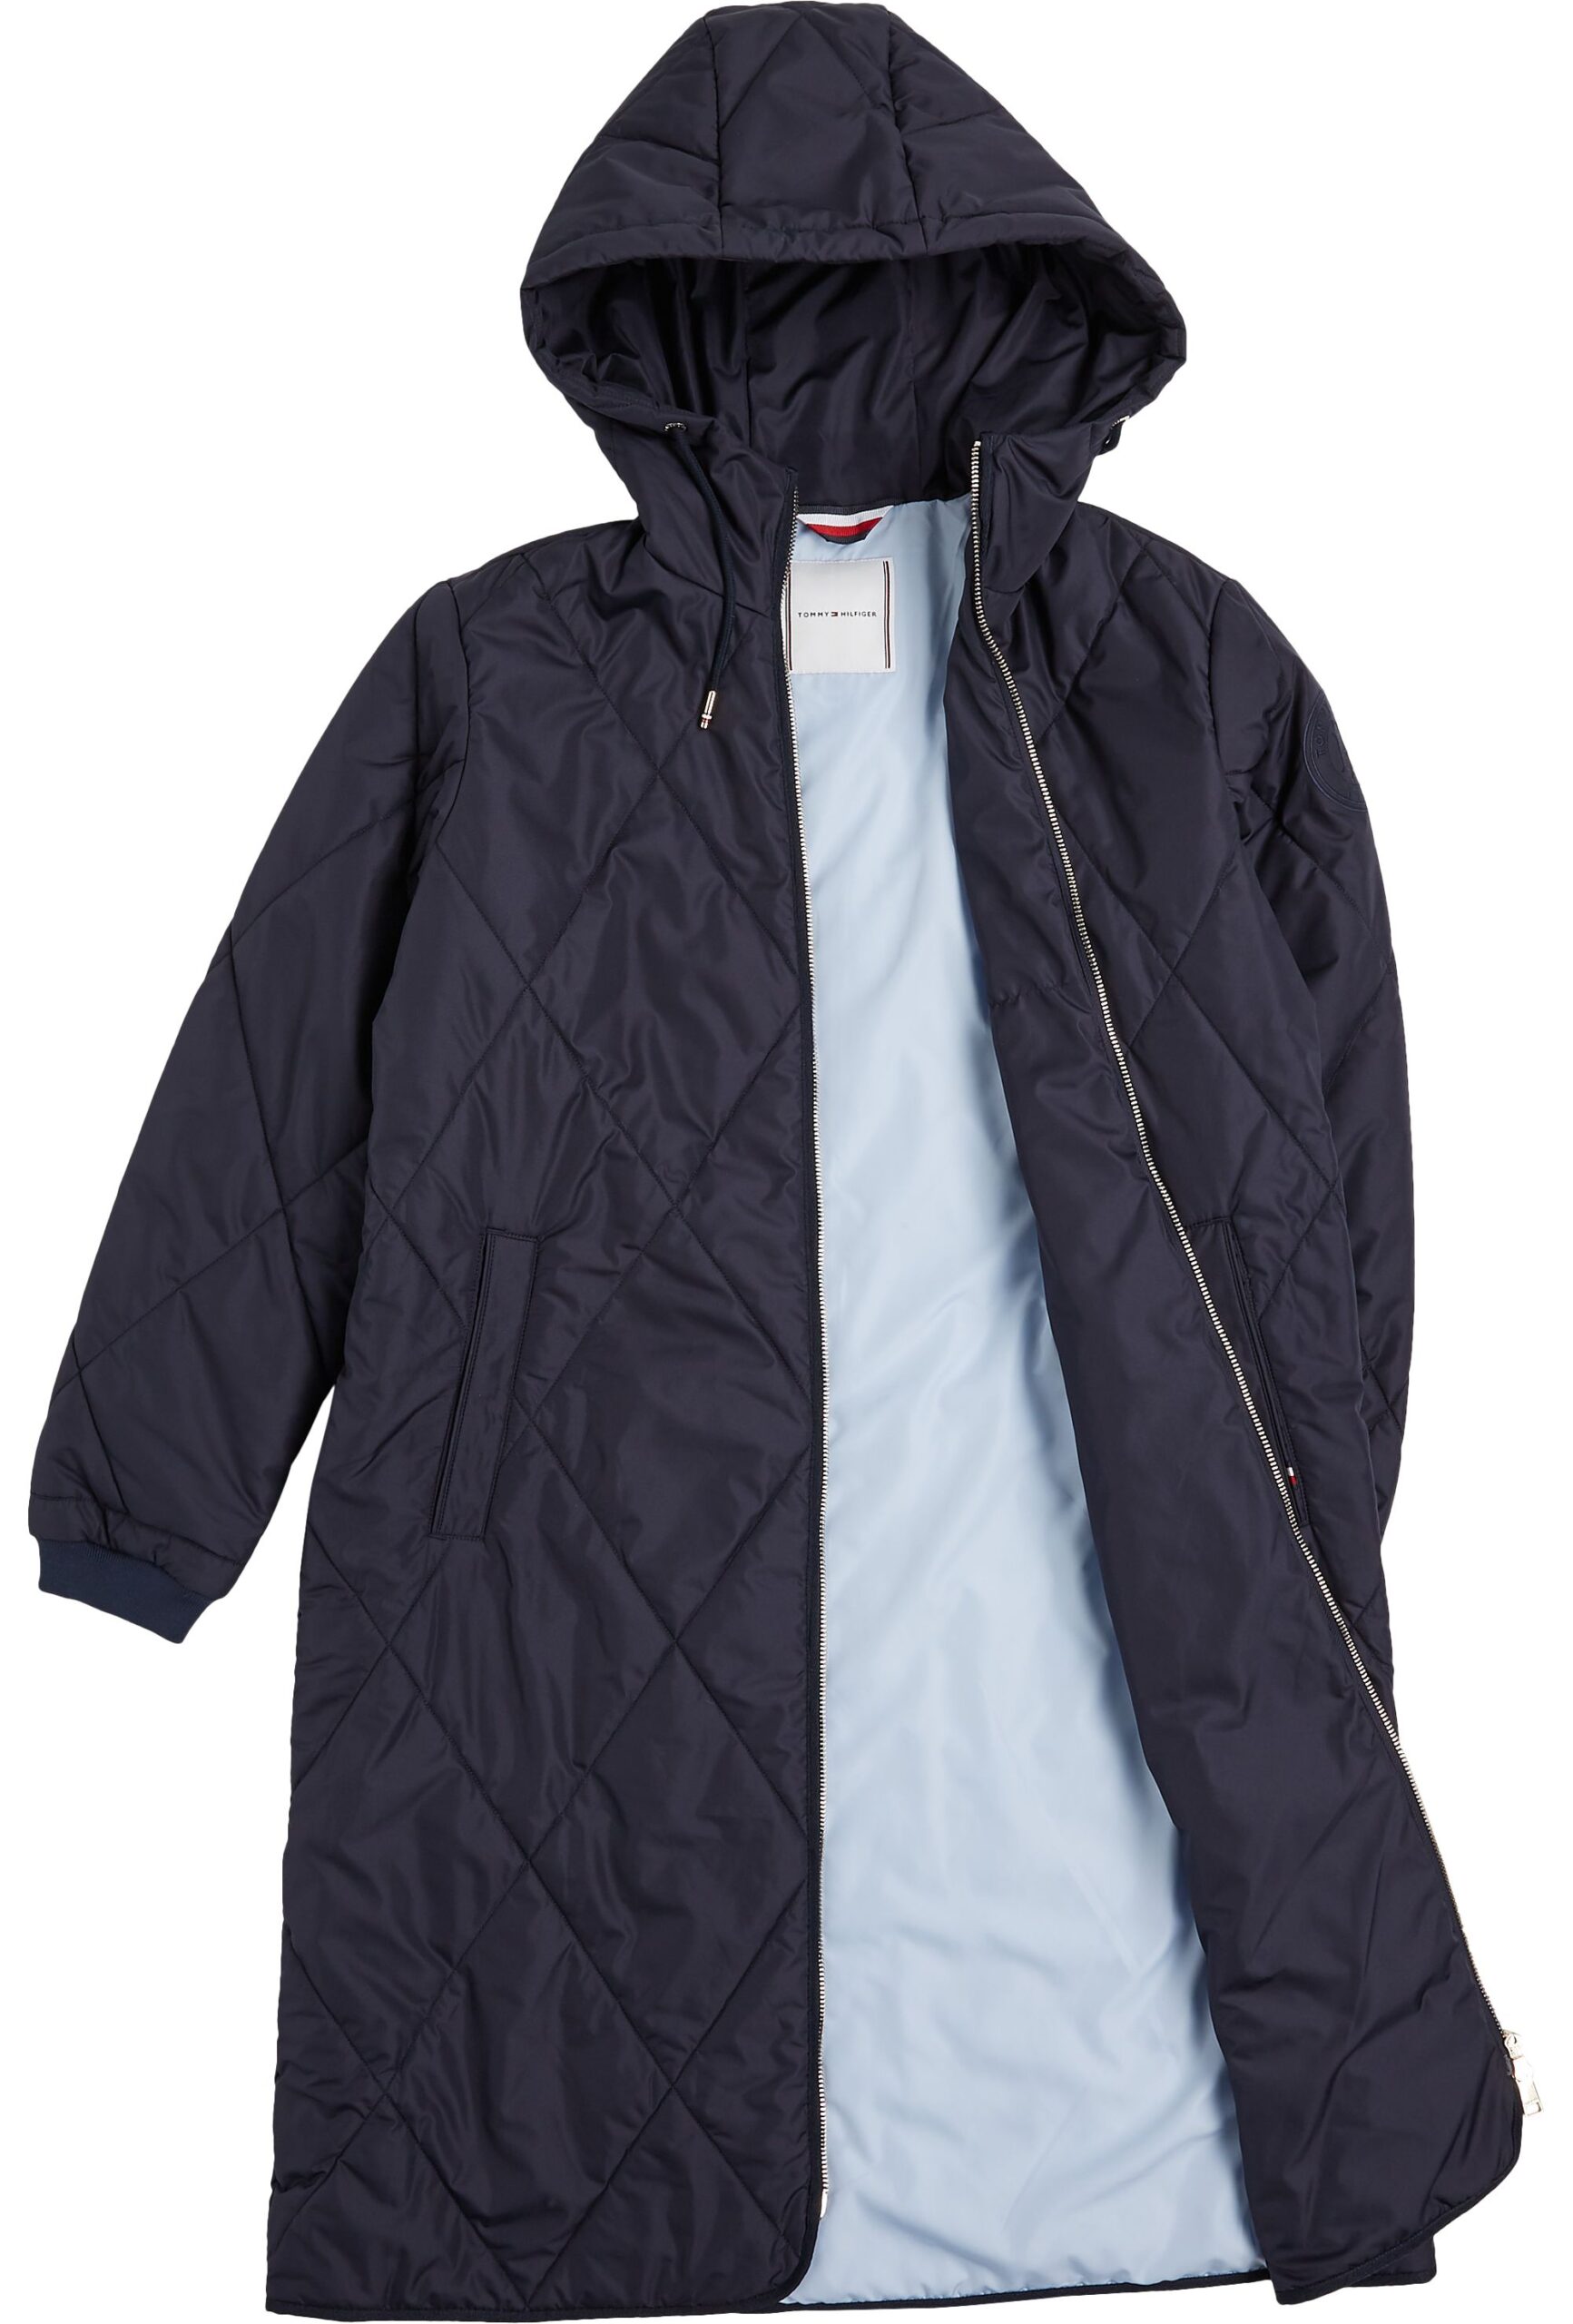 Tommy Hilfiger LW Sorona Quilted Coat